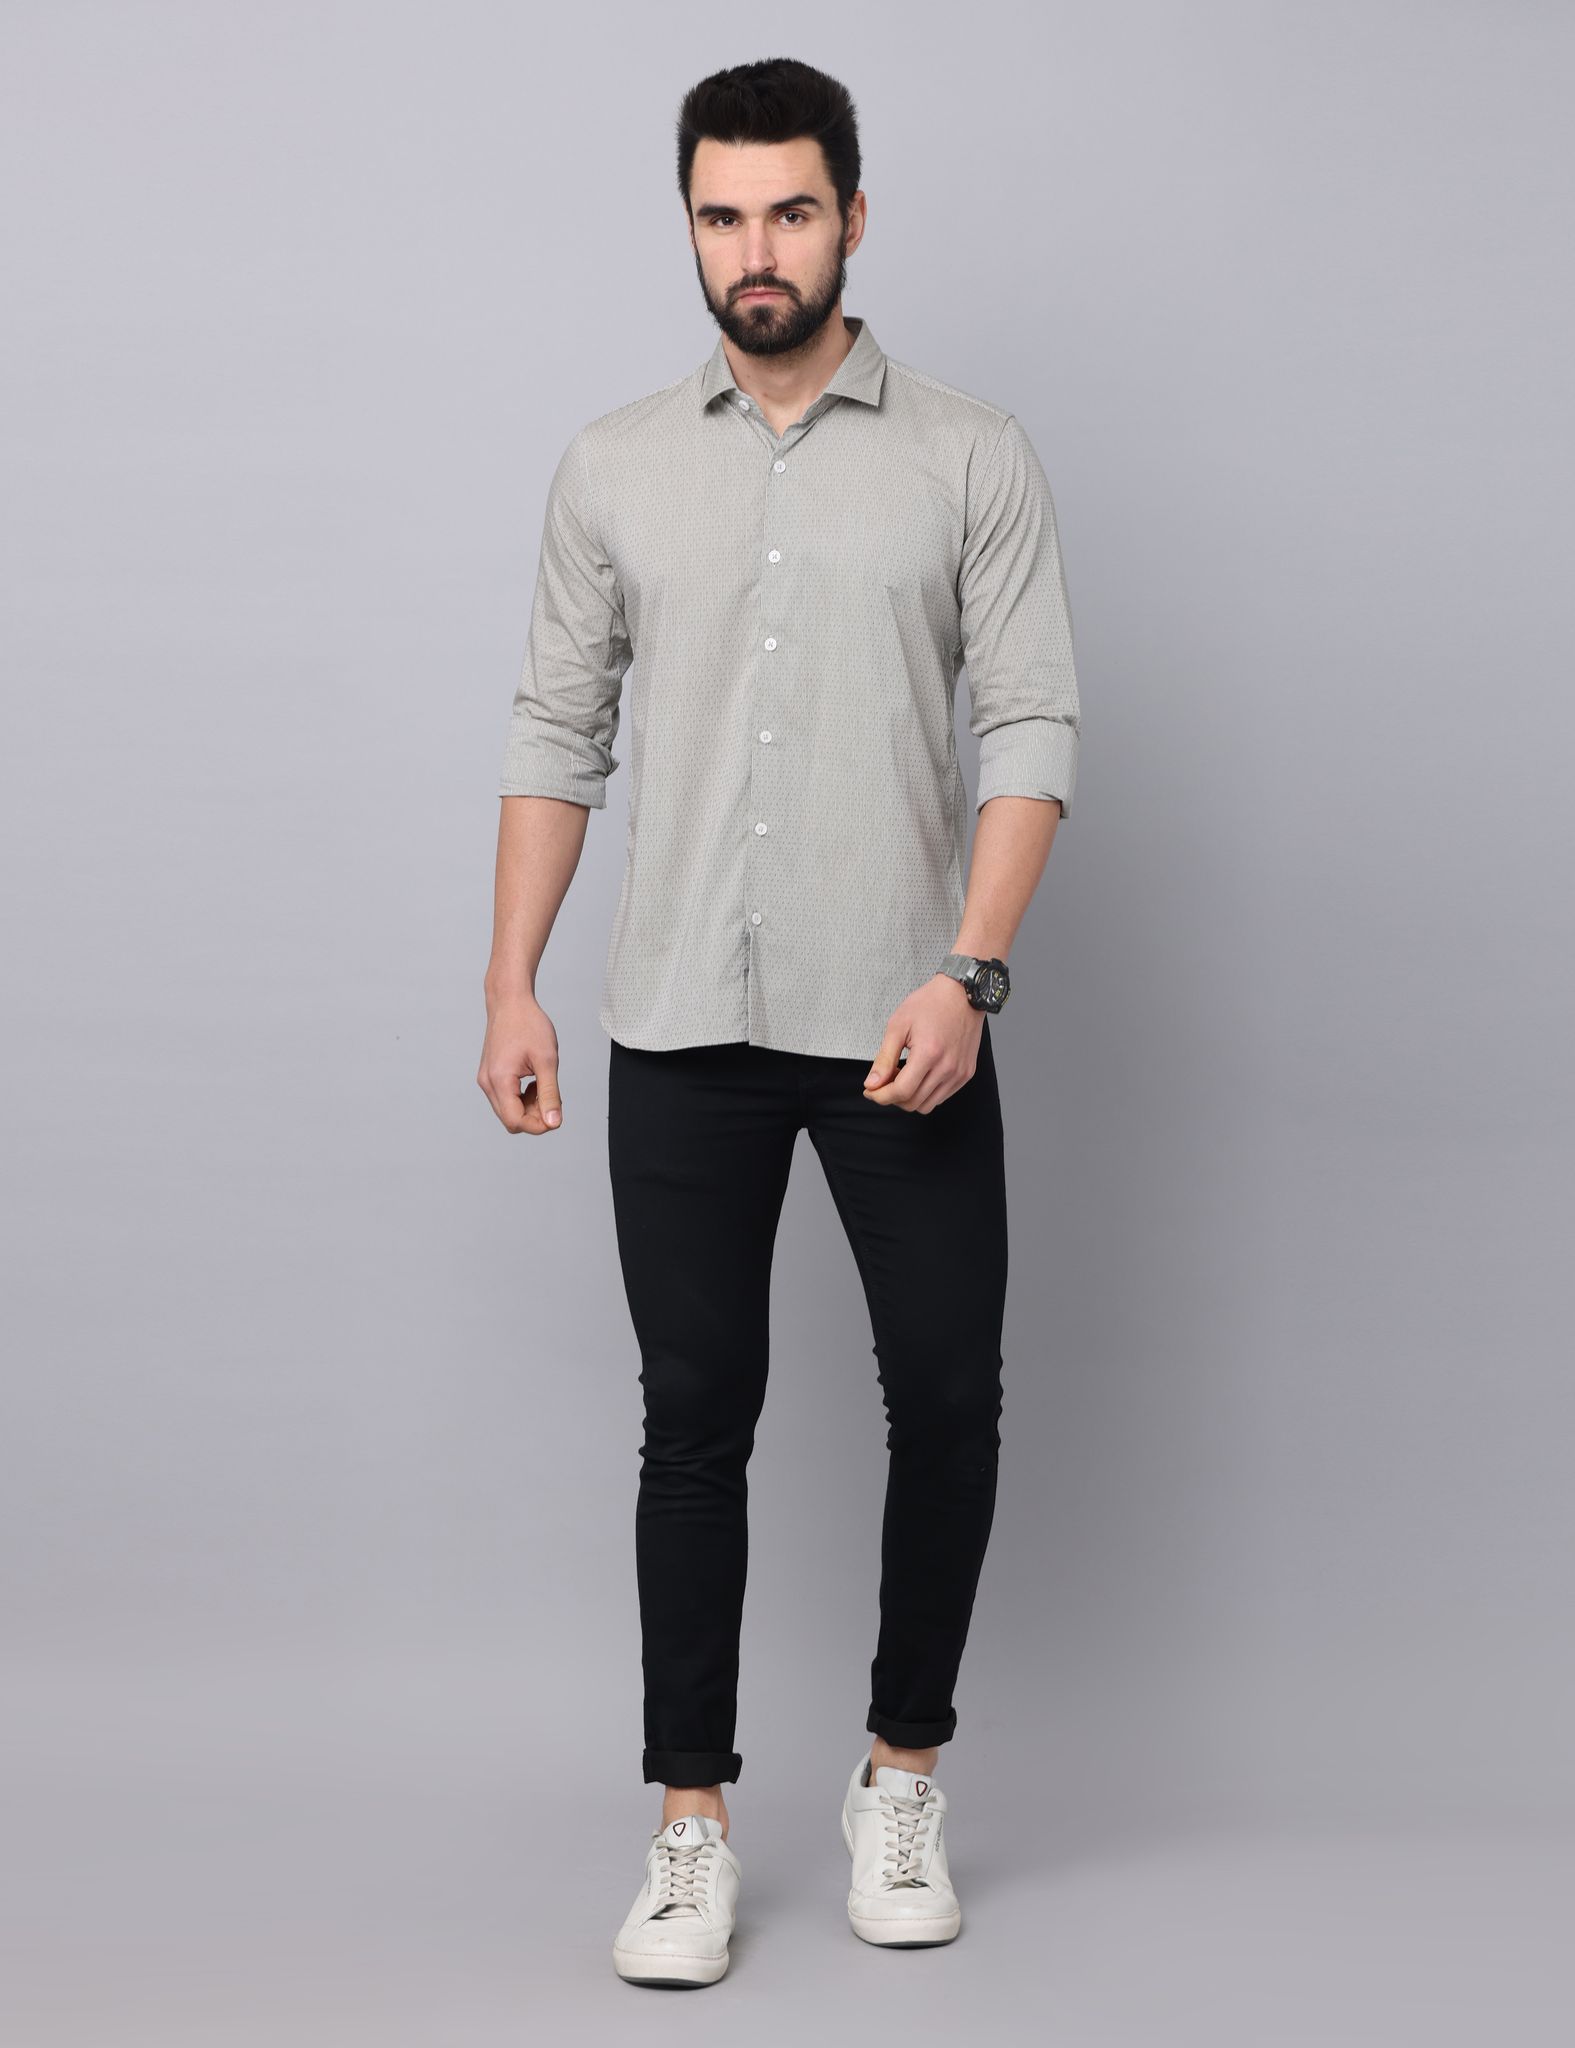 GOLD BOAT Men's  Printed Doby Shirts